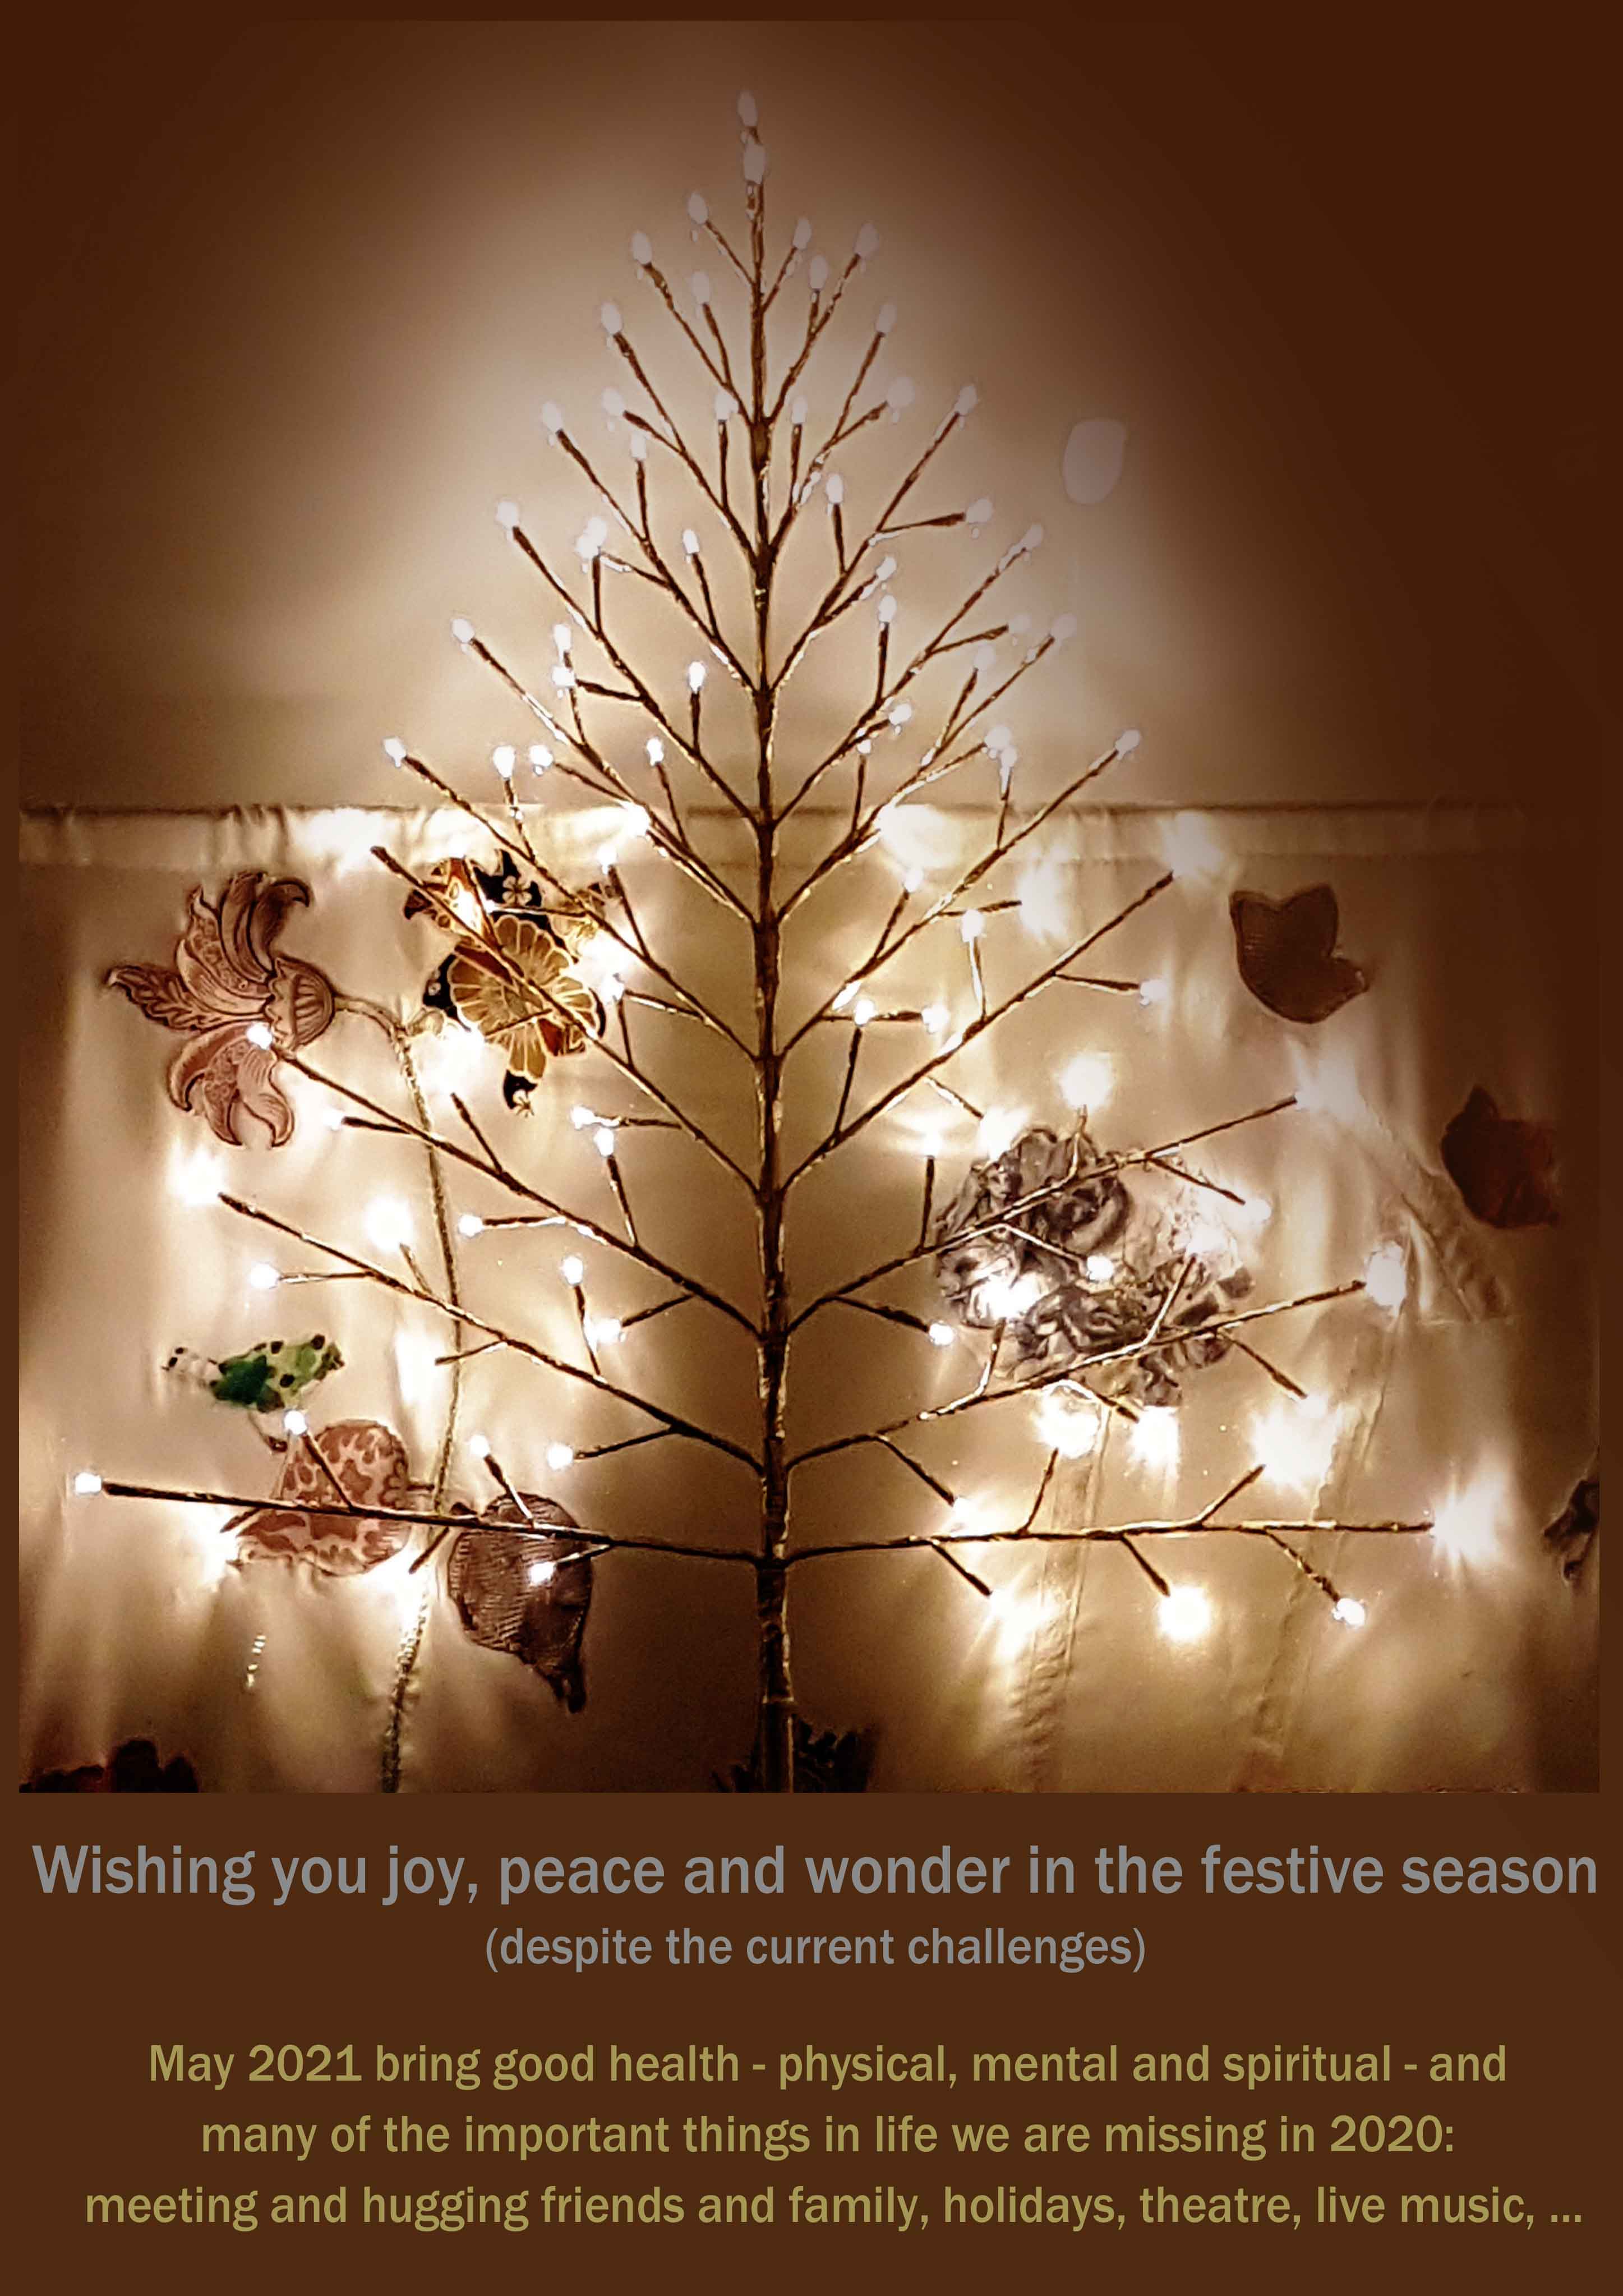 Wishing you joy, peace and wonder in the festive season (despite the current challenges).